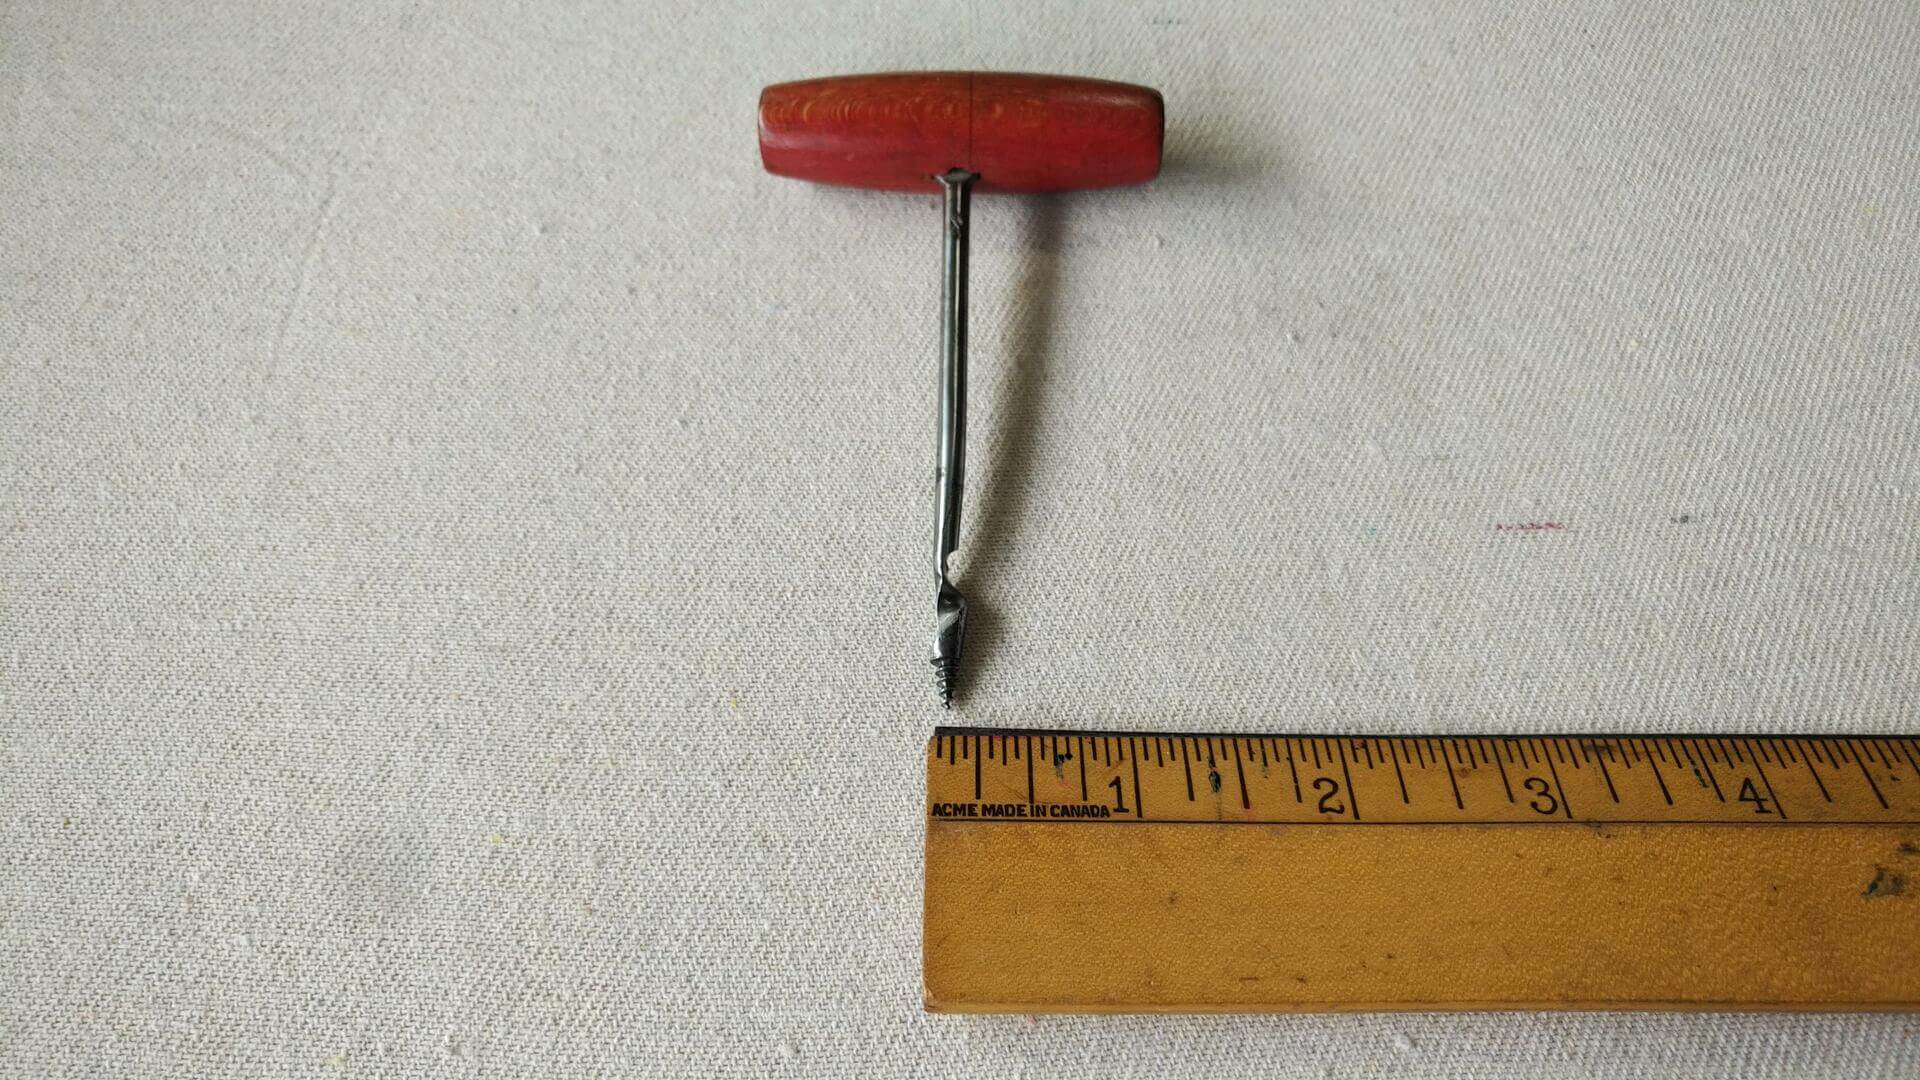 Beautiful vintage gimlet pilot drill hole starter w wooden handle & auger bit. Antique collectible primitive carpenter tendril woodworking hand tool